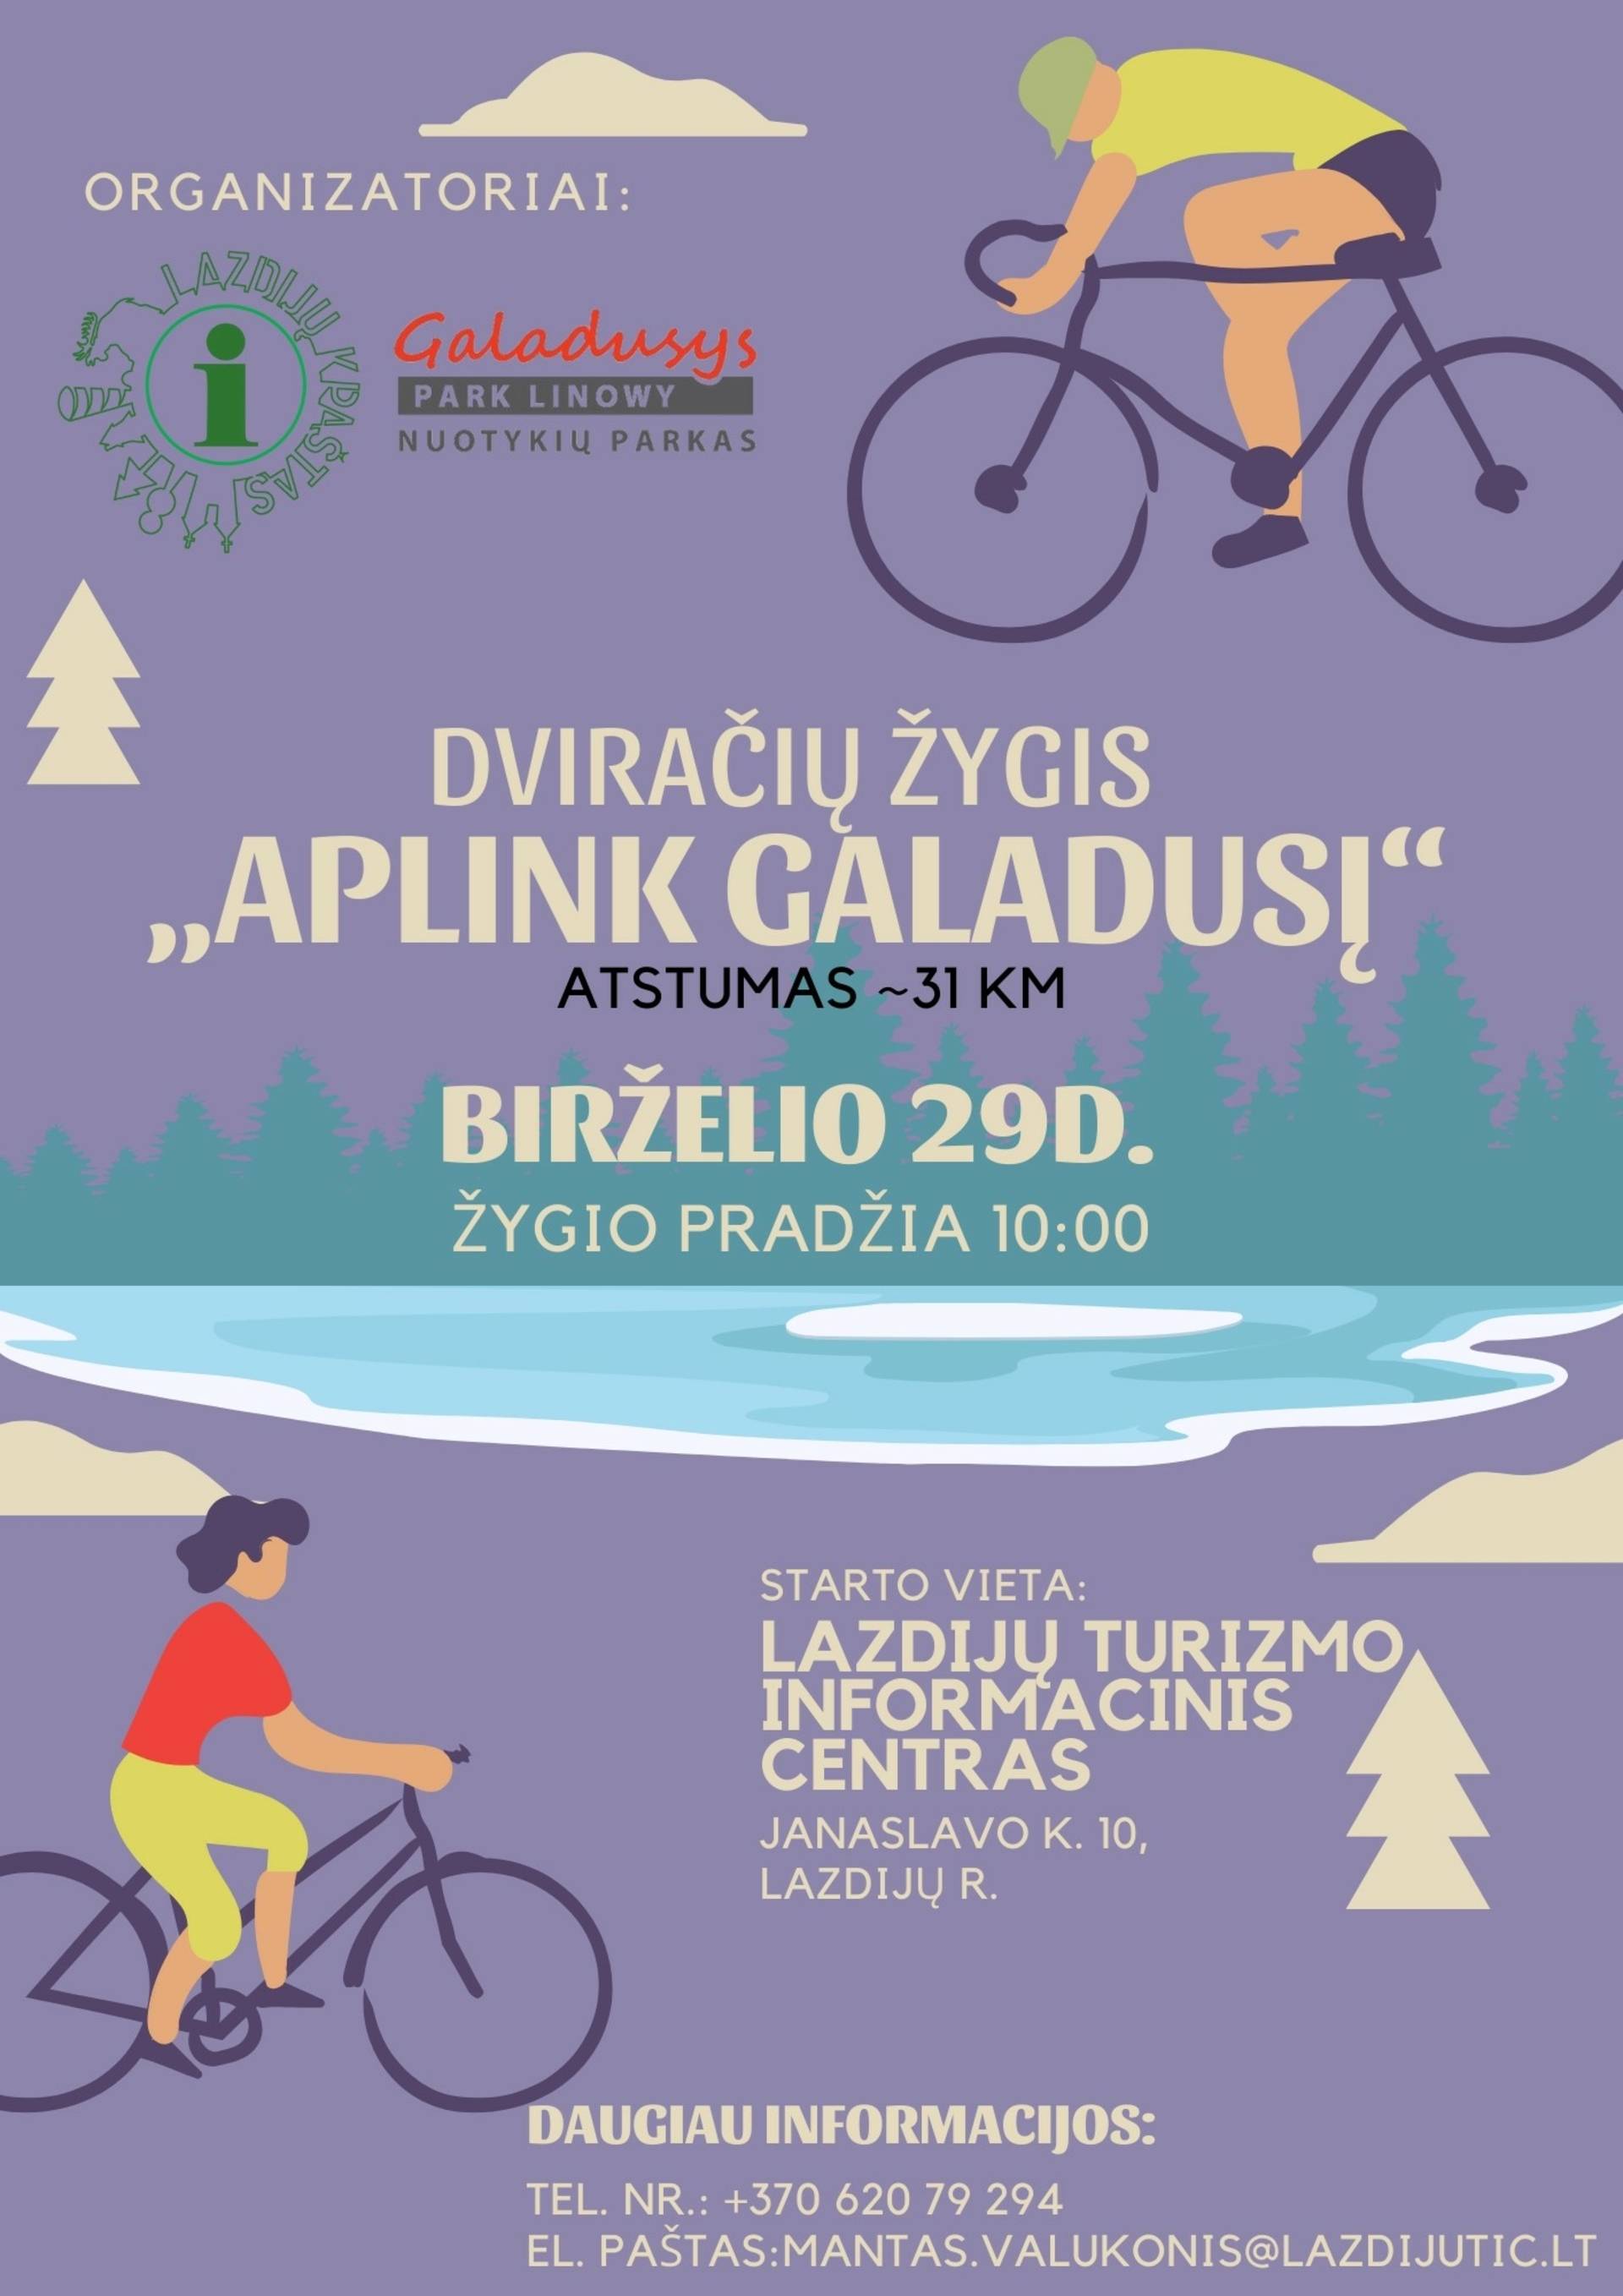 We invite you to a cycling tour around Galadus!